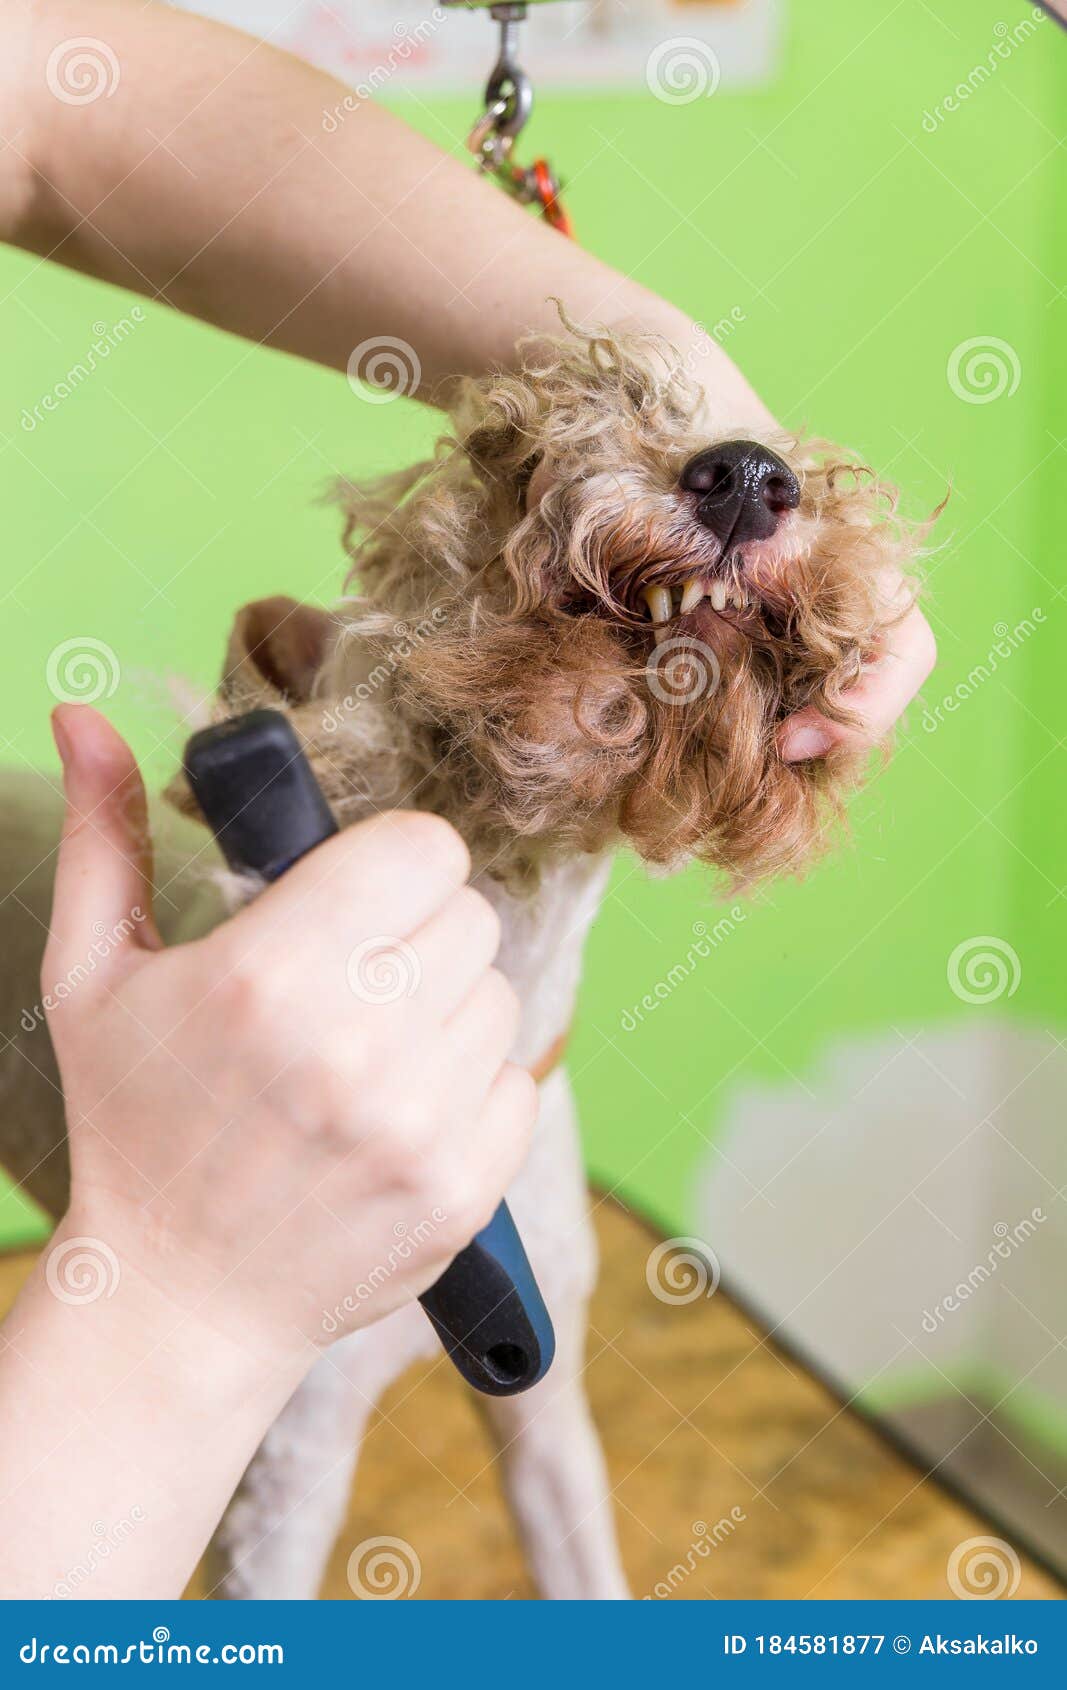 Combing Hair Brush on the Dog`s Face Stock Image - Image of profession ...